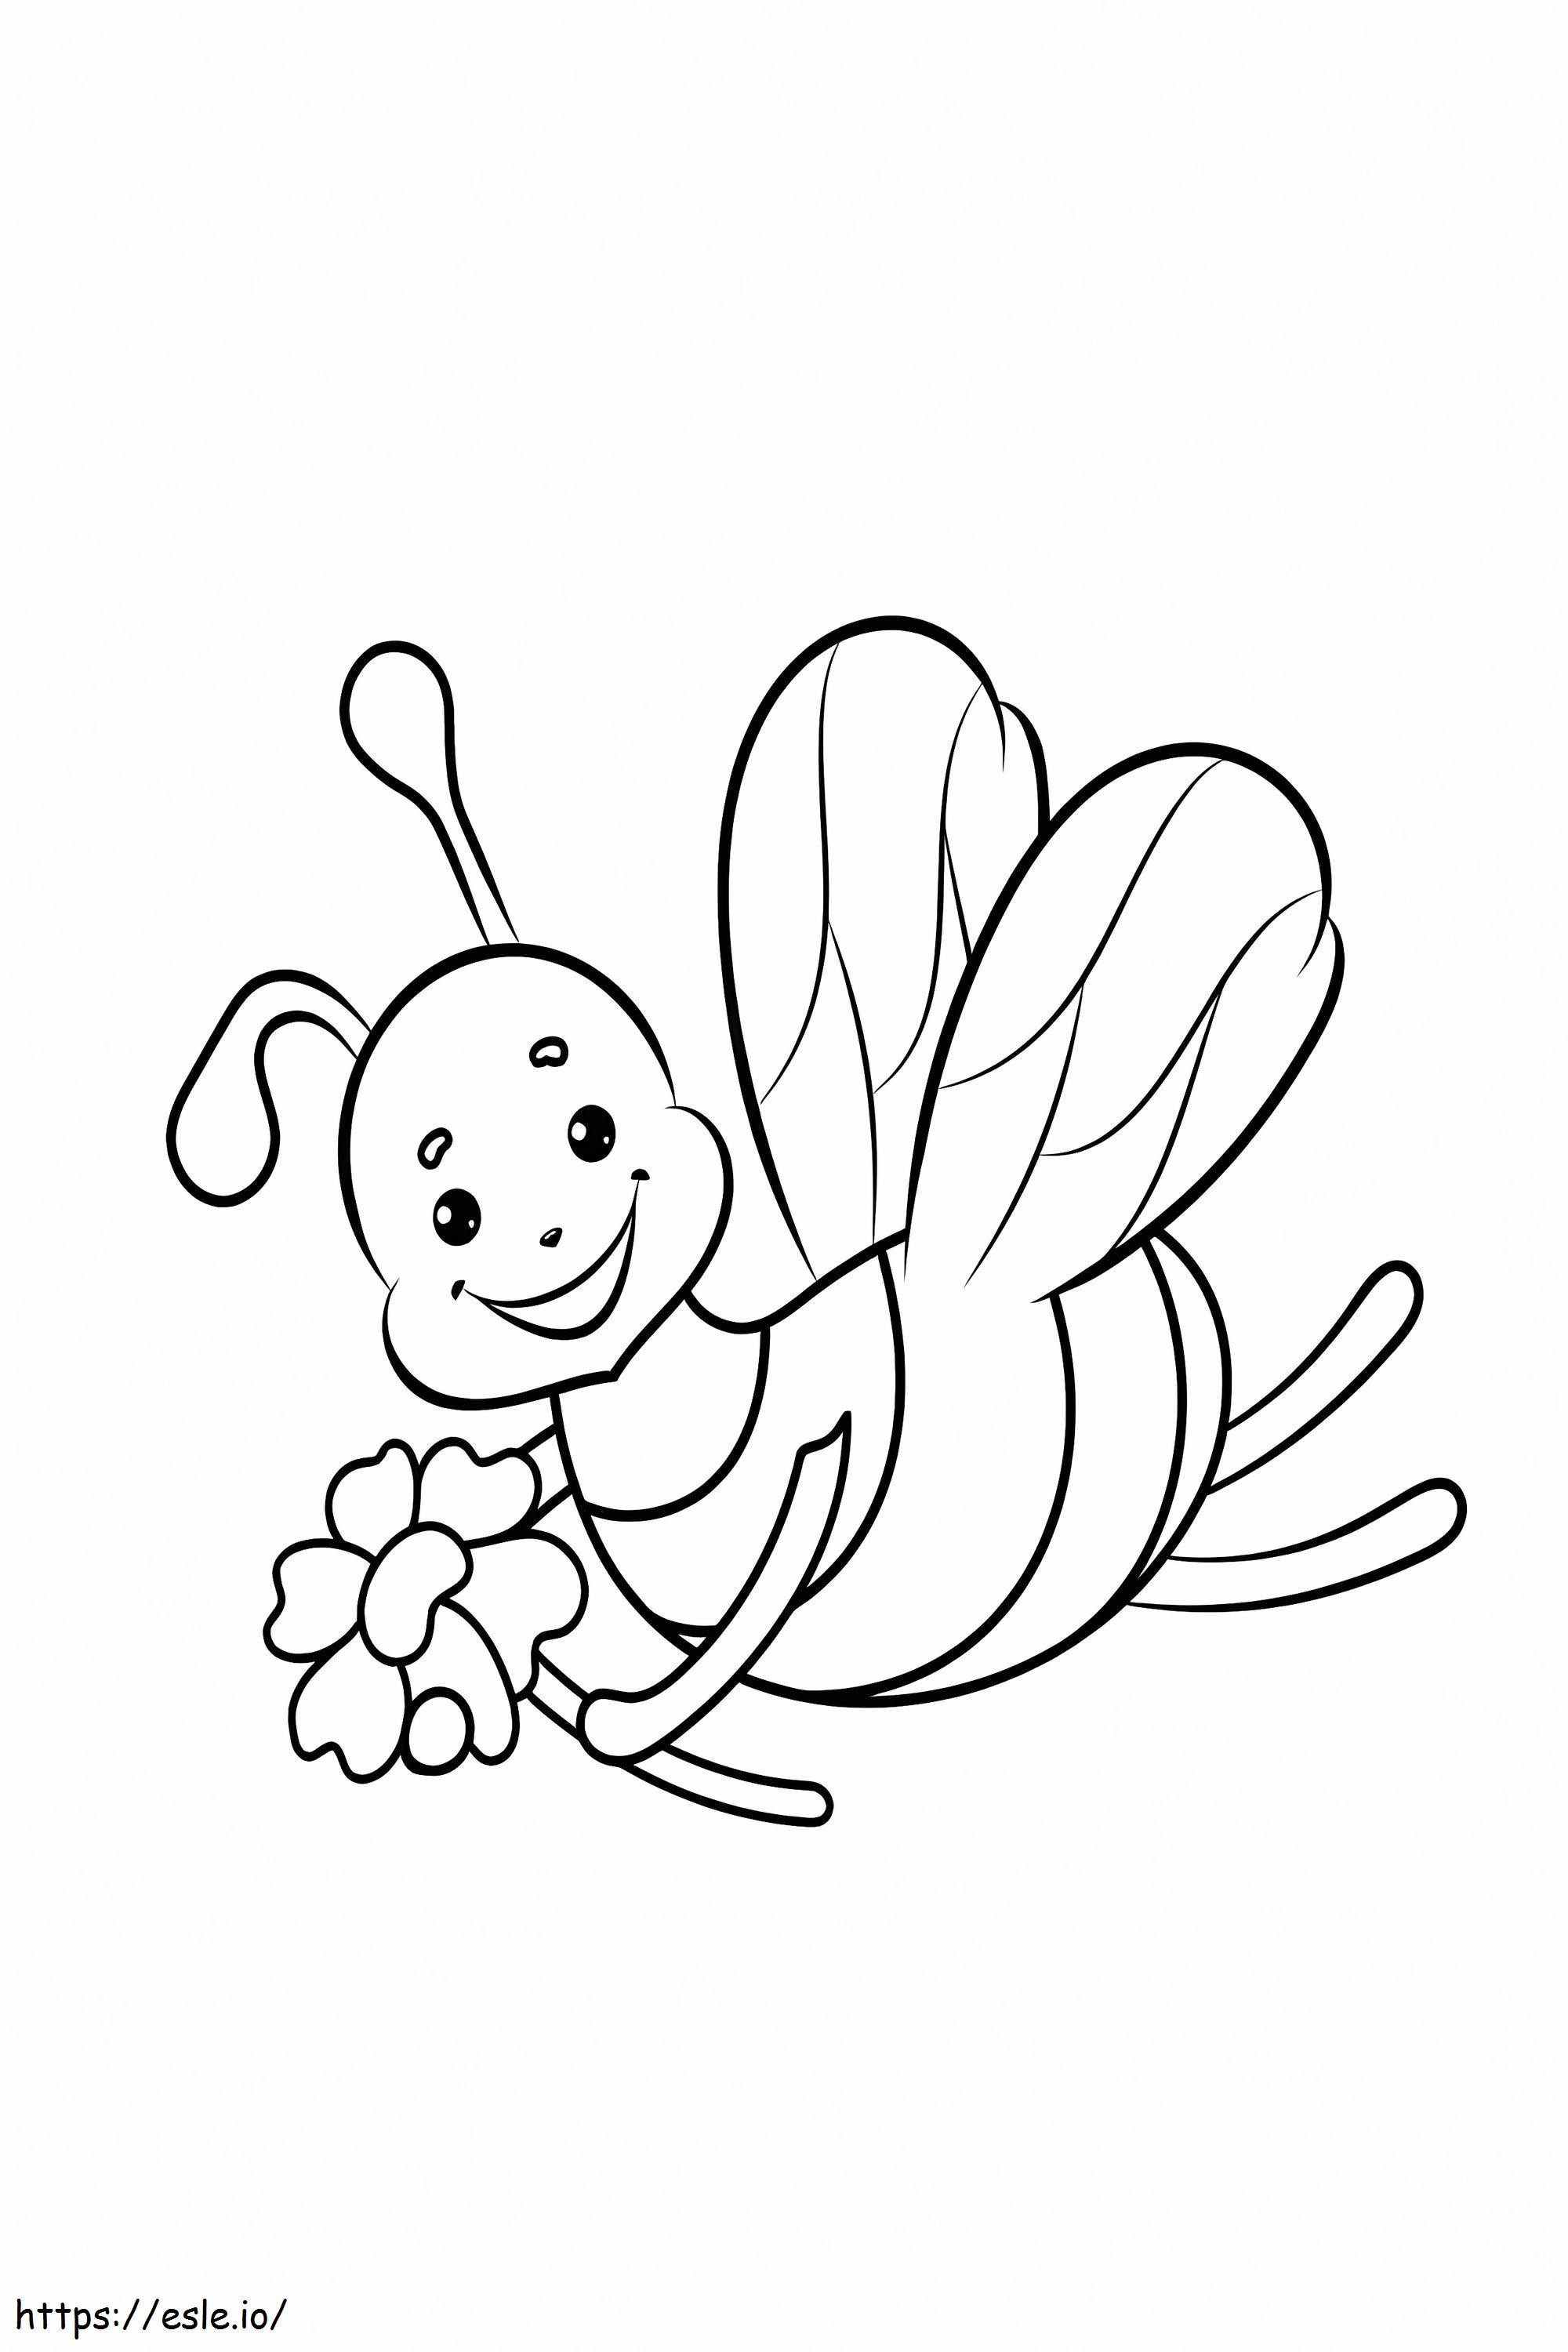 Bee Holding Flower coloring page